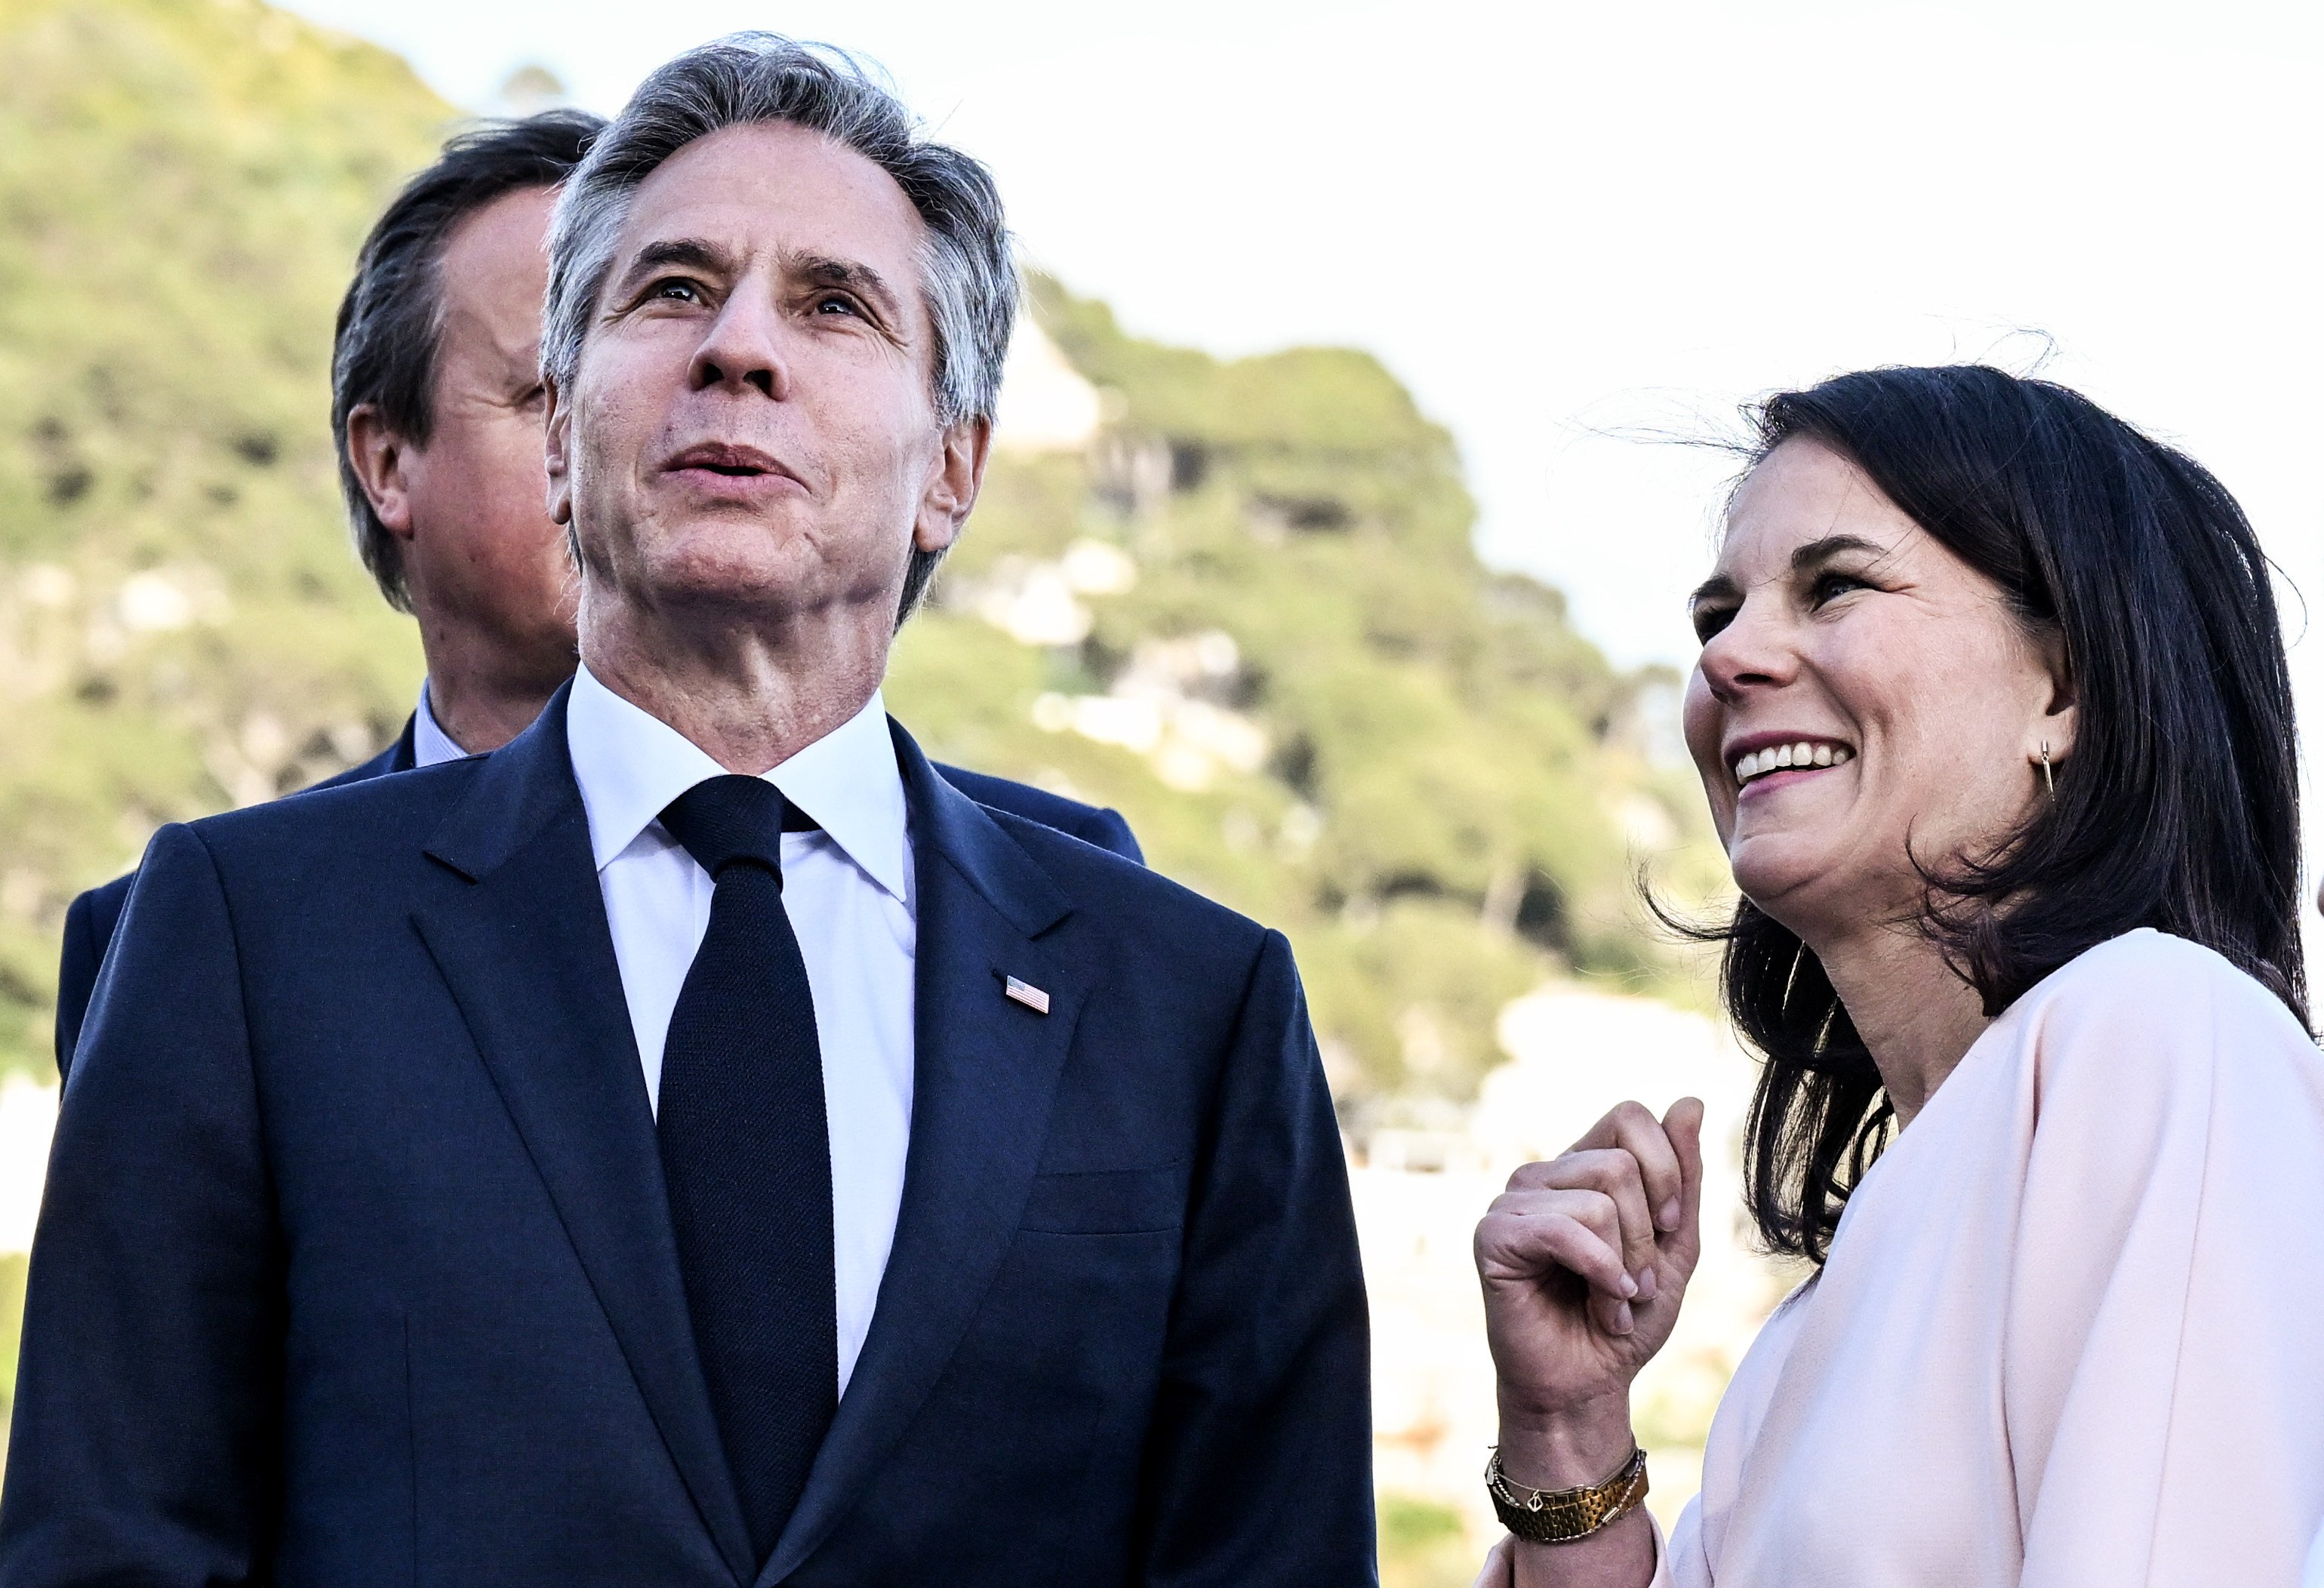 US Secretary of State Antony Blinken and German Foreign Minister Annalena Baerbock at the G7 meeting of foreign ministers in Capri, Italy on Thursday. Photo: dpa